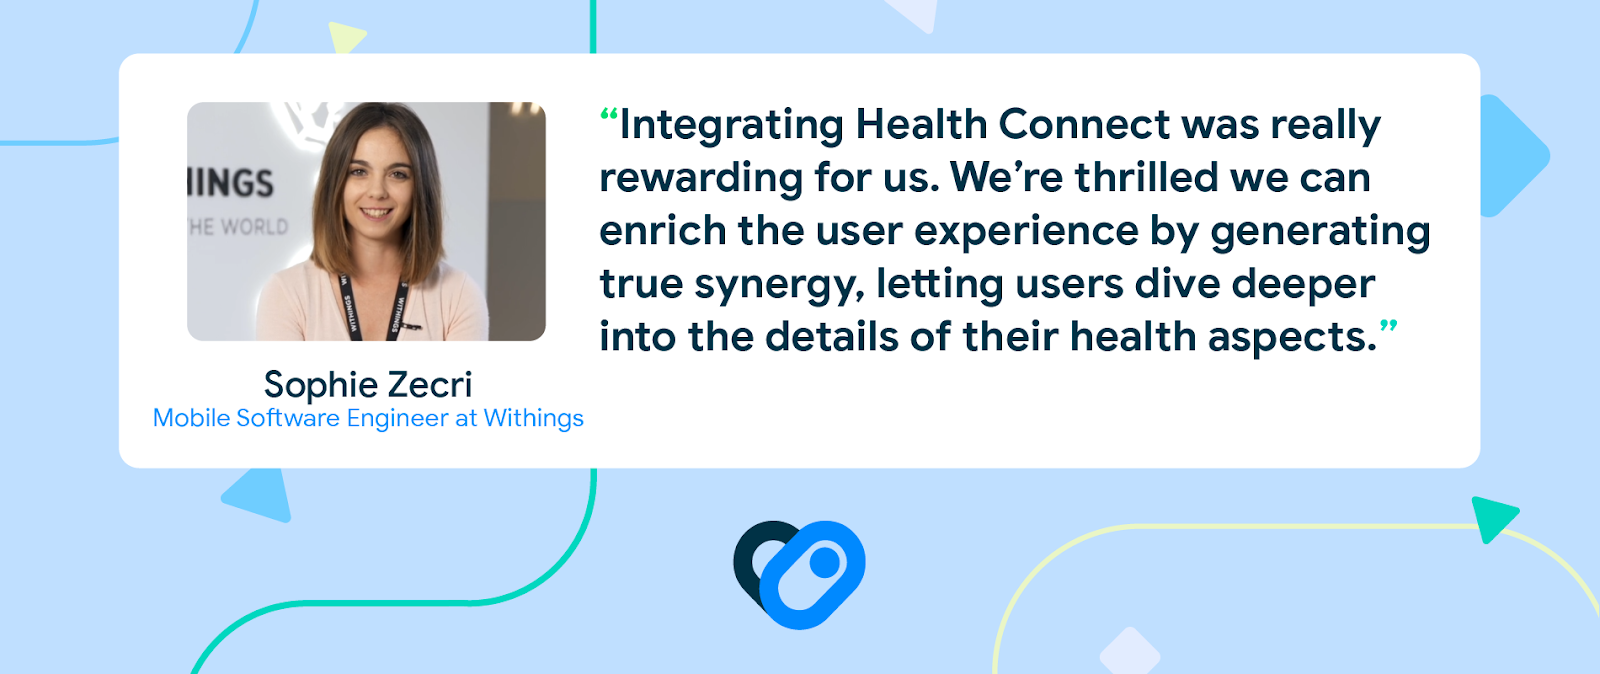 Headshot of Sophie Zecri, Mobile Software Engineer at Withings, with quote, 'Integrating Health Connect was really rewarding for us. We're thrilled we can enrich the user experience by generating true synergy, letting users  dive deeper into the details of their health aspects.' 